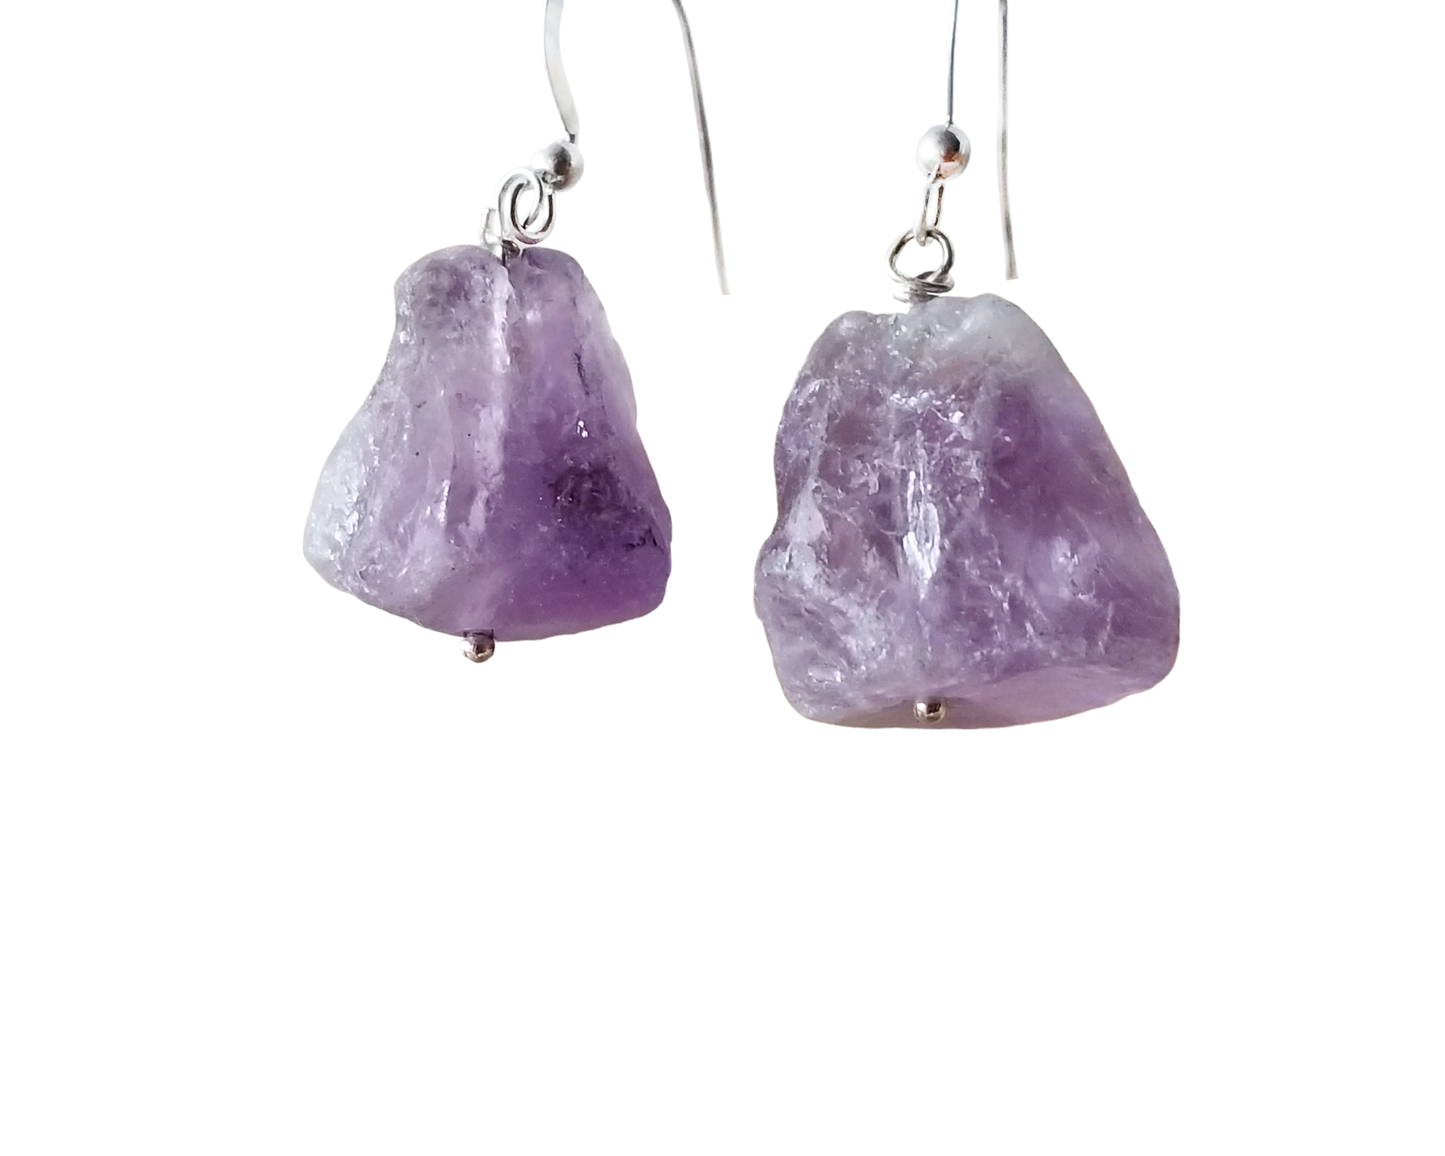 Amethyst Peace Nugget Earrings made with Sterling Silver &Rough Natural Amethyst Nuggets, Purple, Lavender Gemstones.